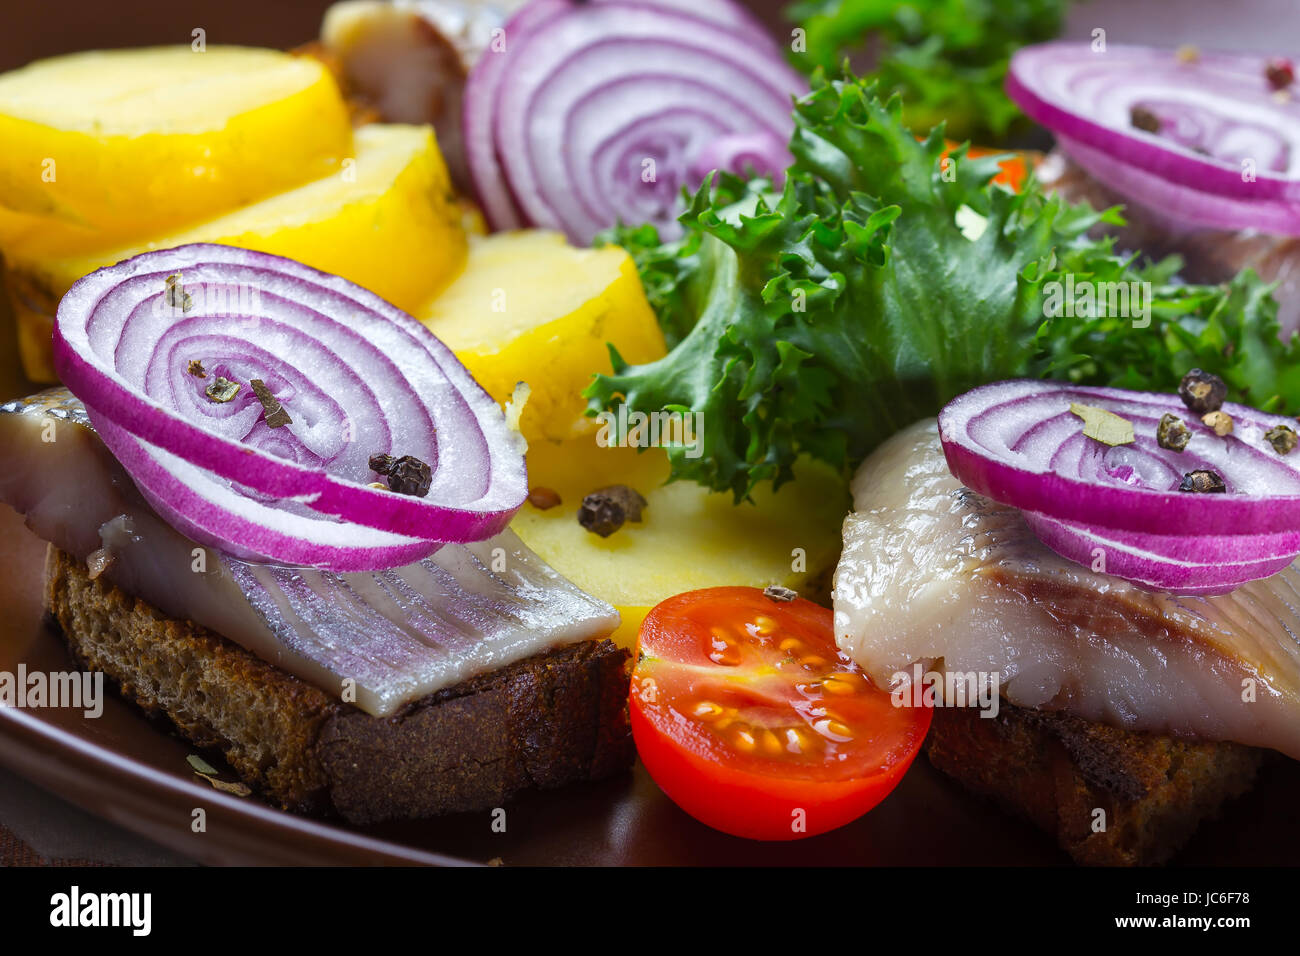 Sandwiches of rye bread with herring, red onions, herbs and potato slices Stock Photo